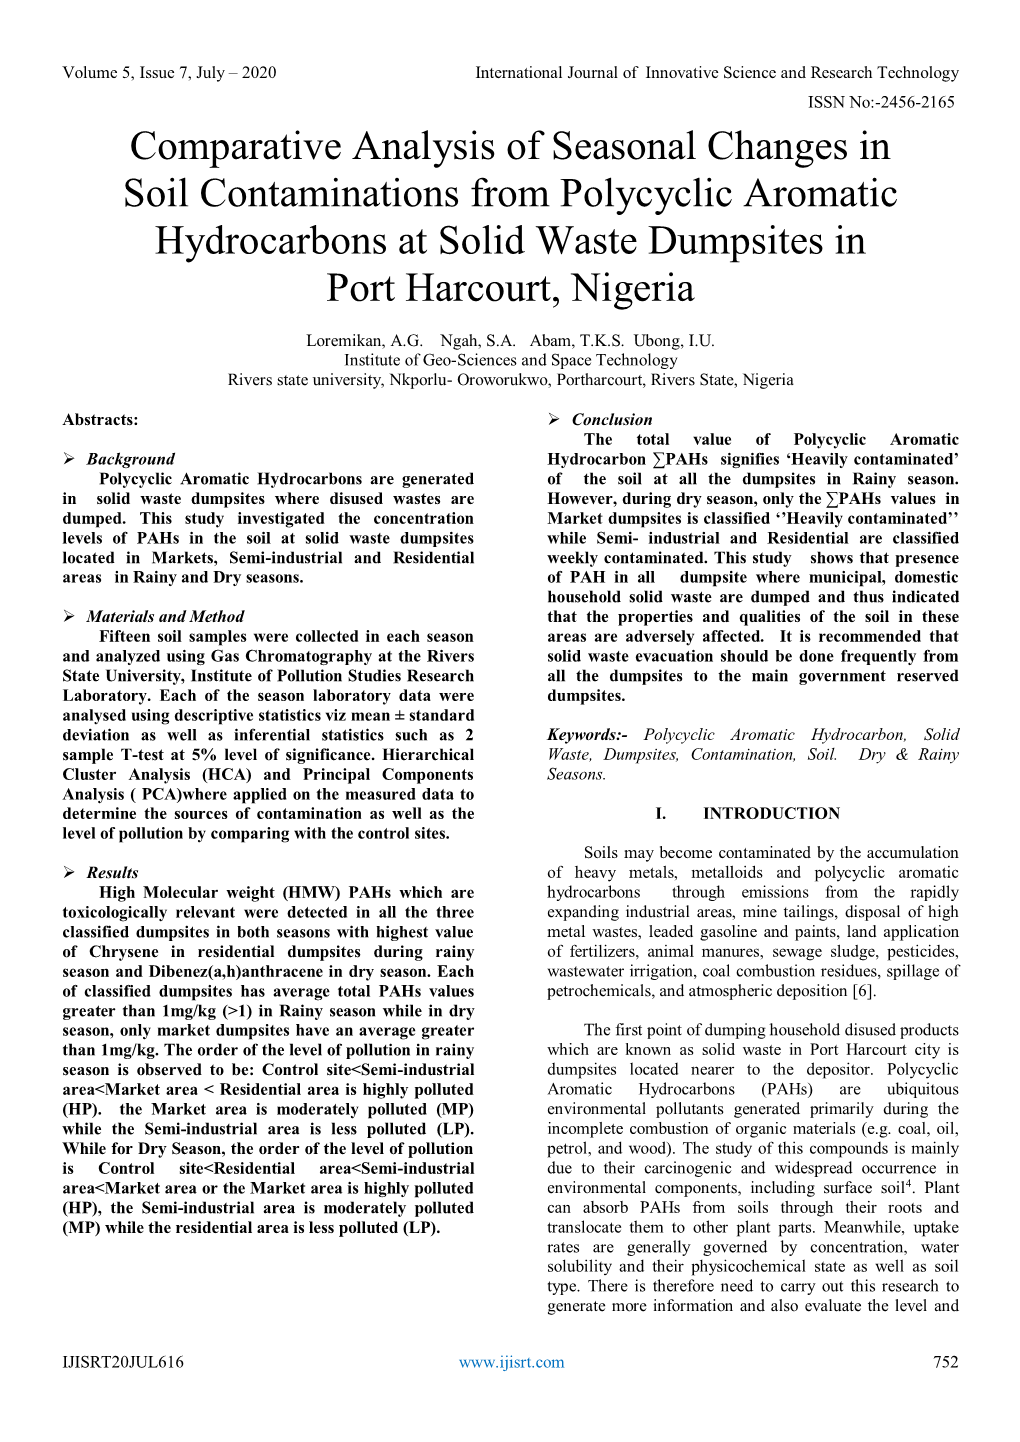 Comparative Analysis of Seasonal Changes in Soil Contaminations from Polycyclic Aromatic Hydrocarbons at Solid Waste Dumpsites in Port Harcourt, Nigeria